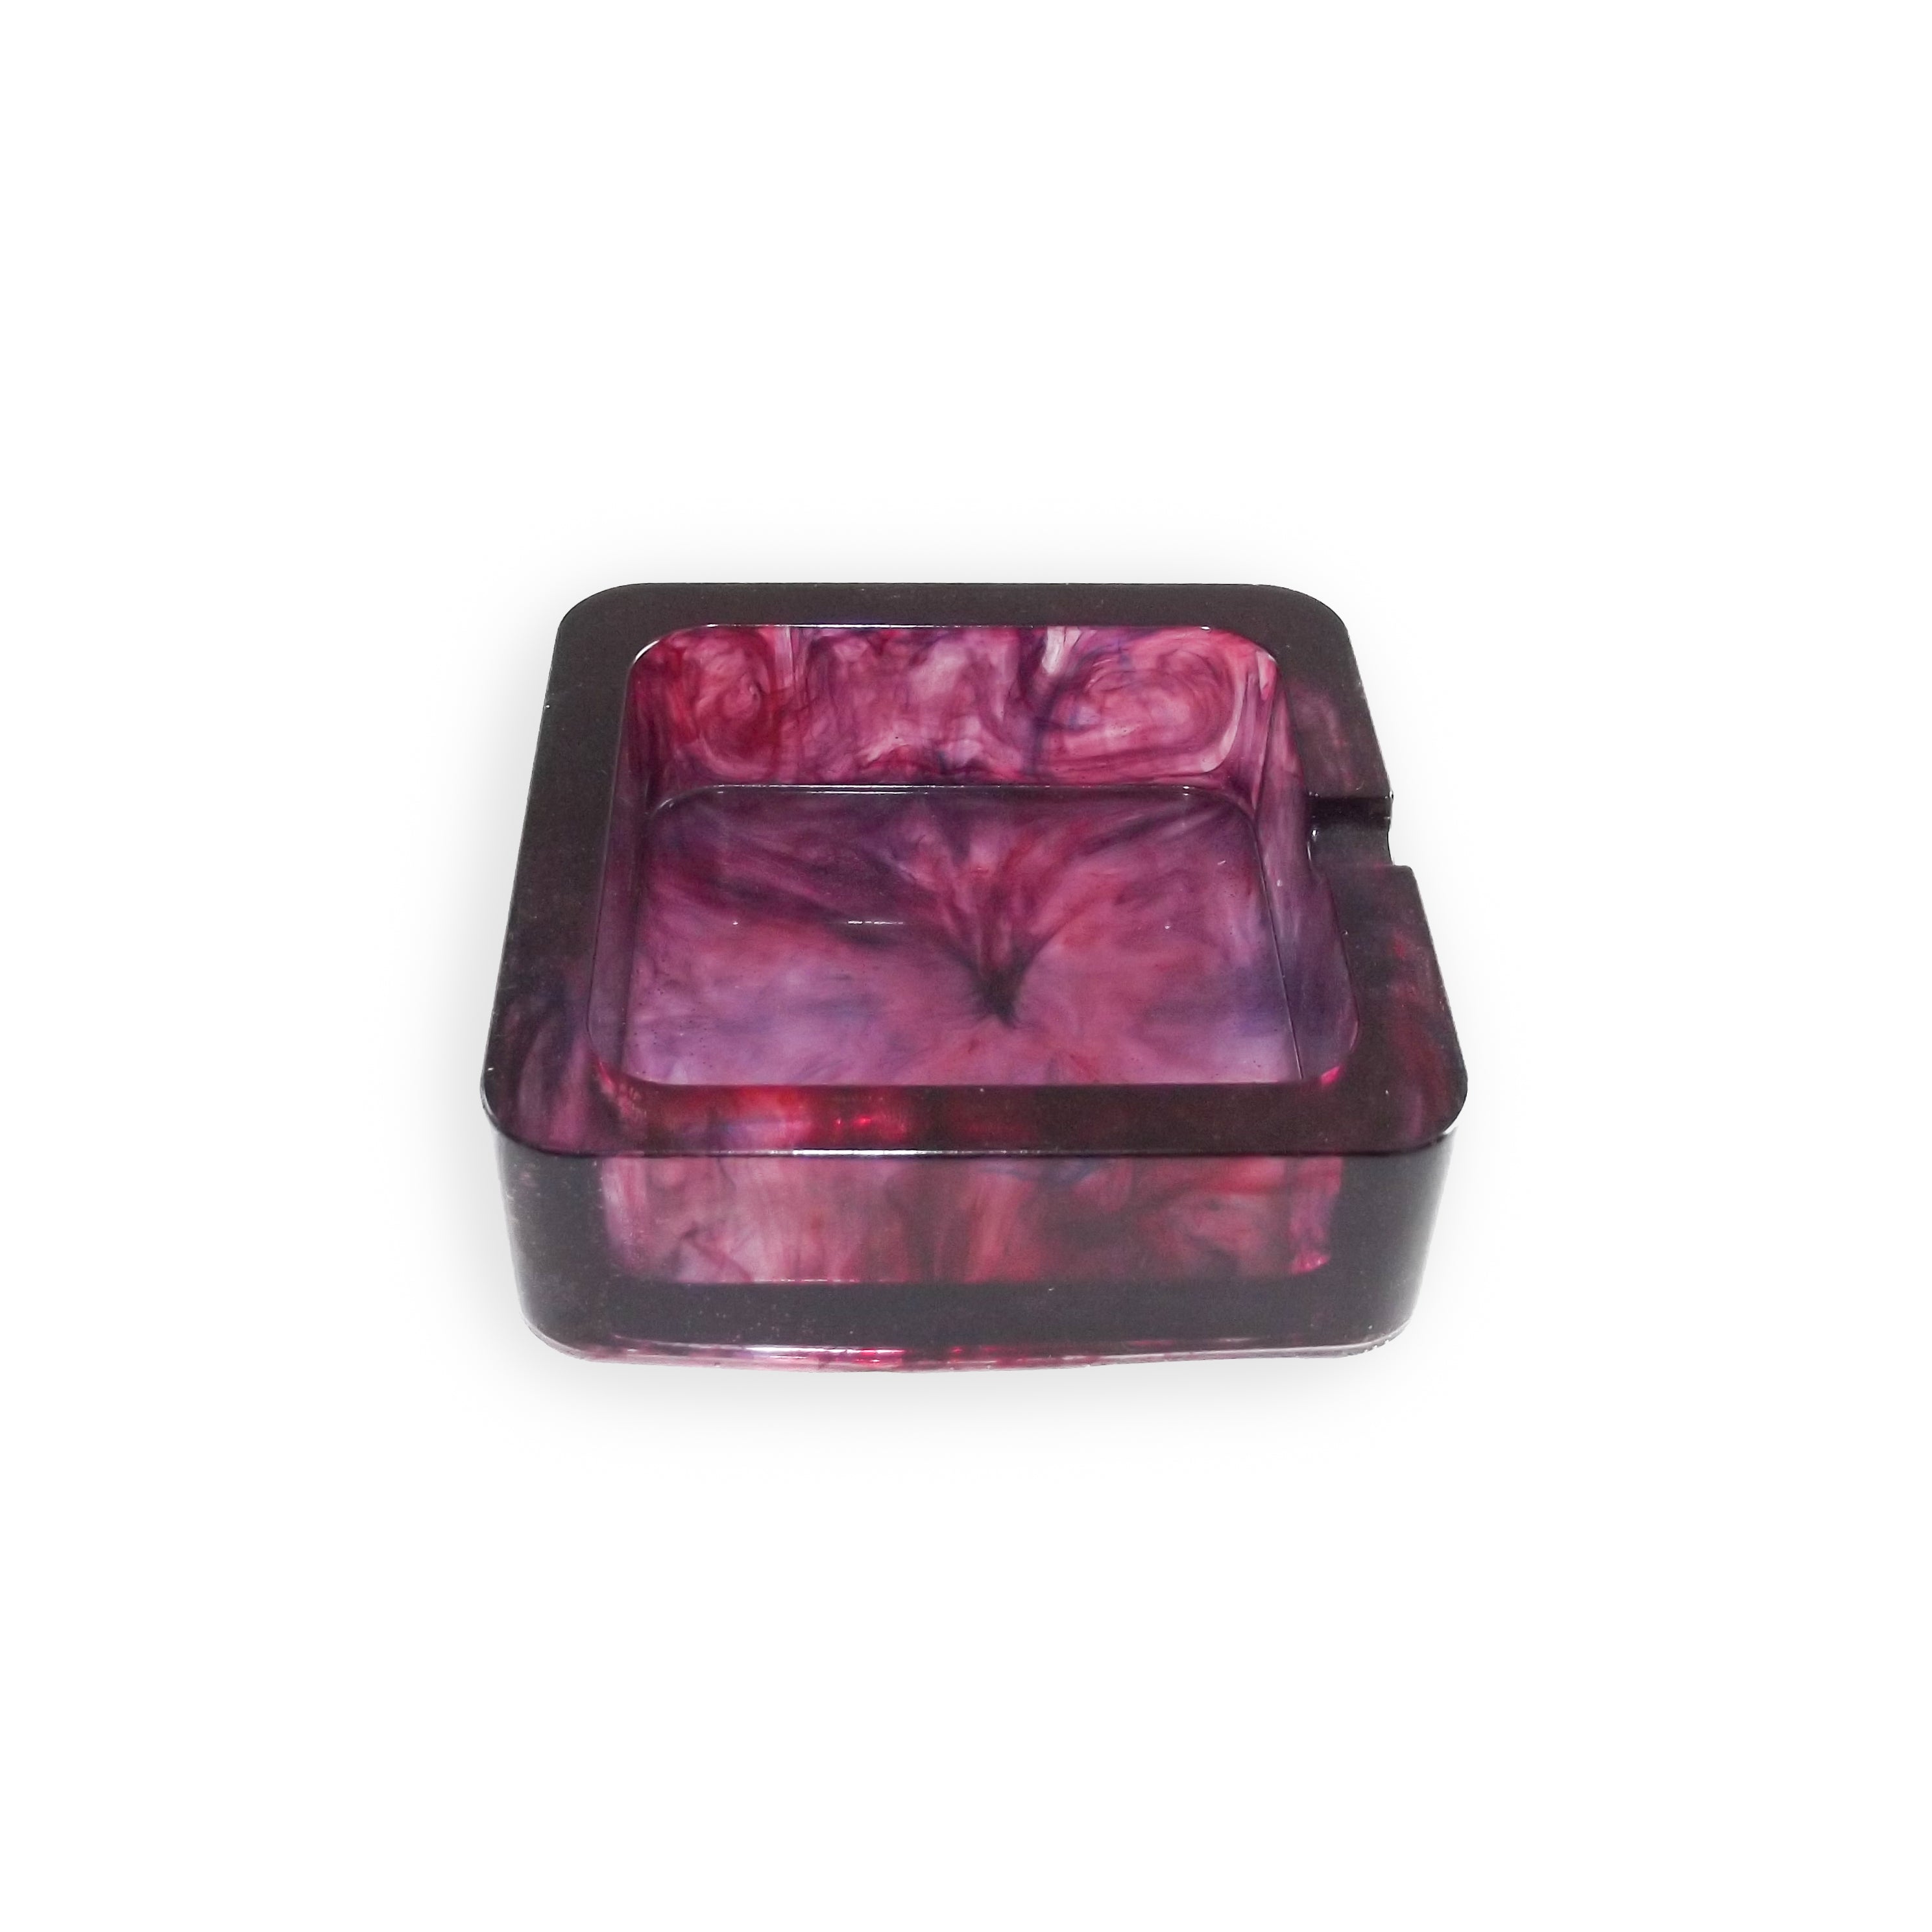 Image of a red and blue CanEmpire resin ashtray from CanArt collection. This handcrafted piece made of eco-friendly resin offers heat protection as well as unmatched style & durability.